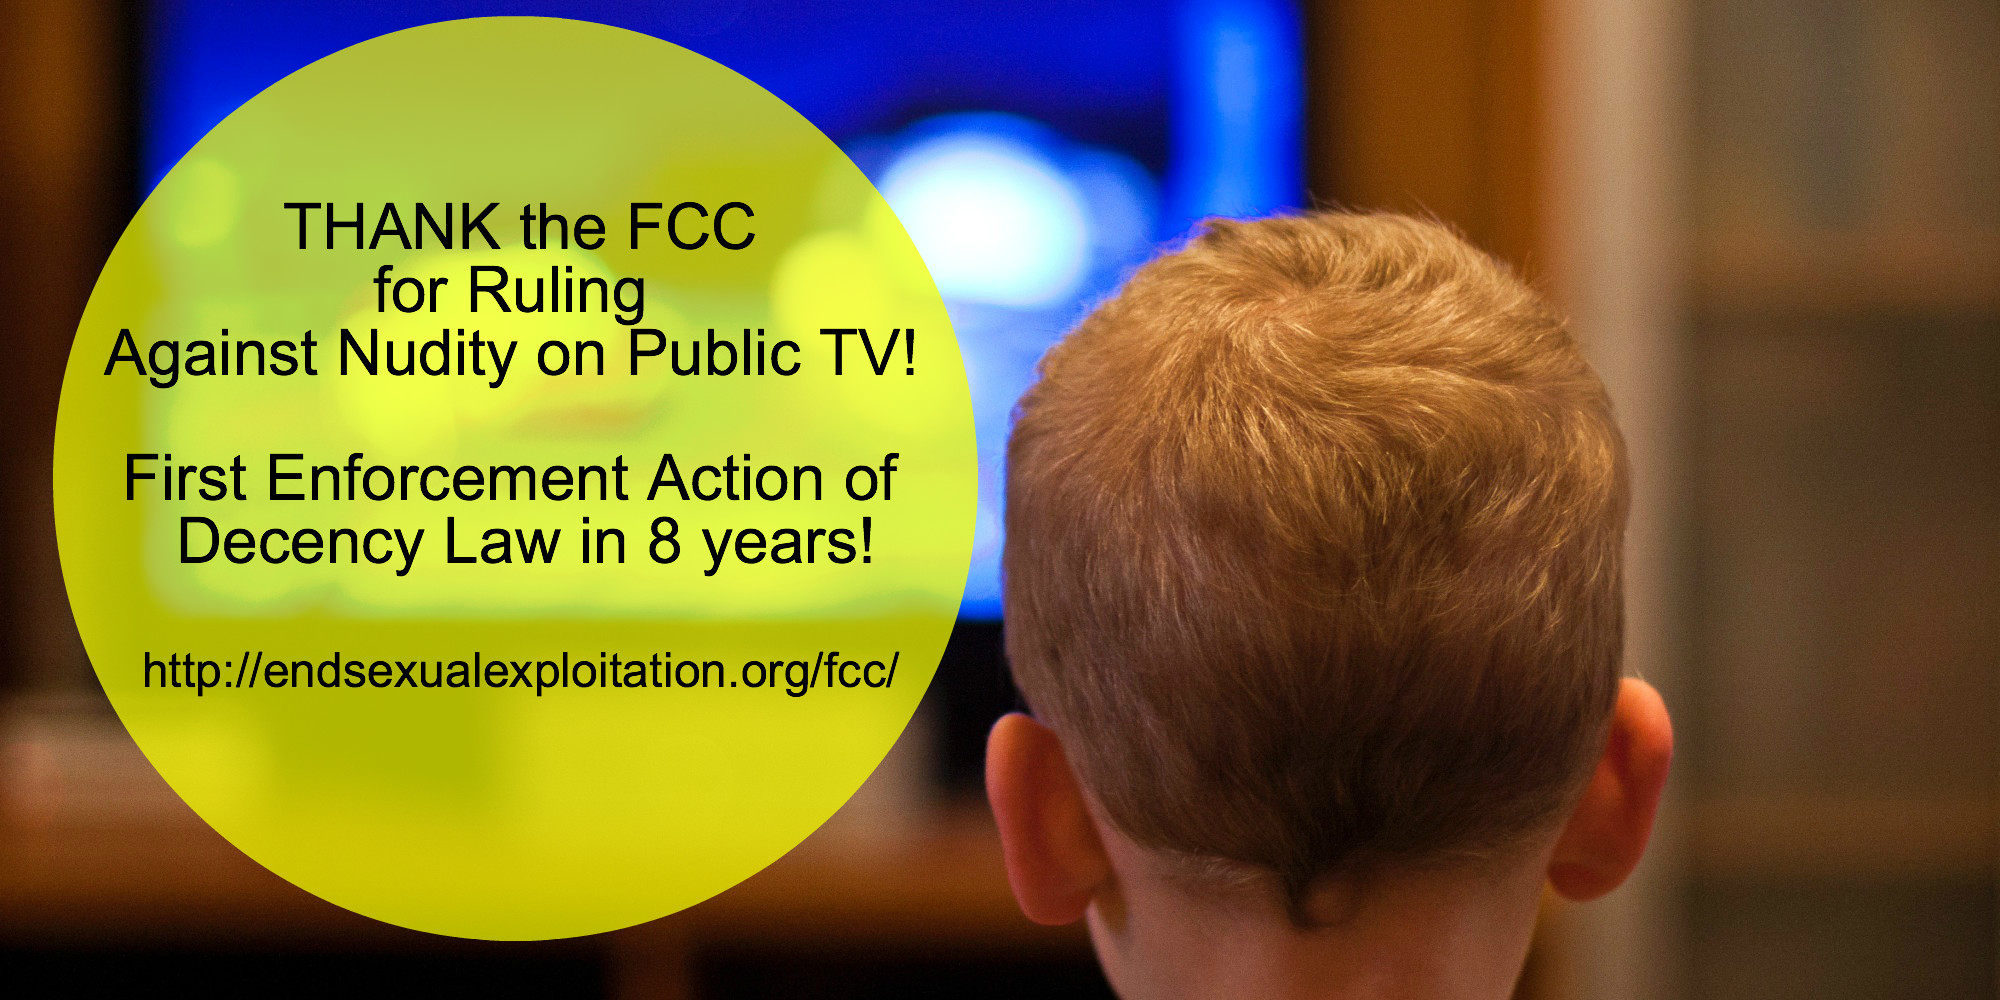 Thank the FCC for enforcing broadcast decency standards after eight year hiatus